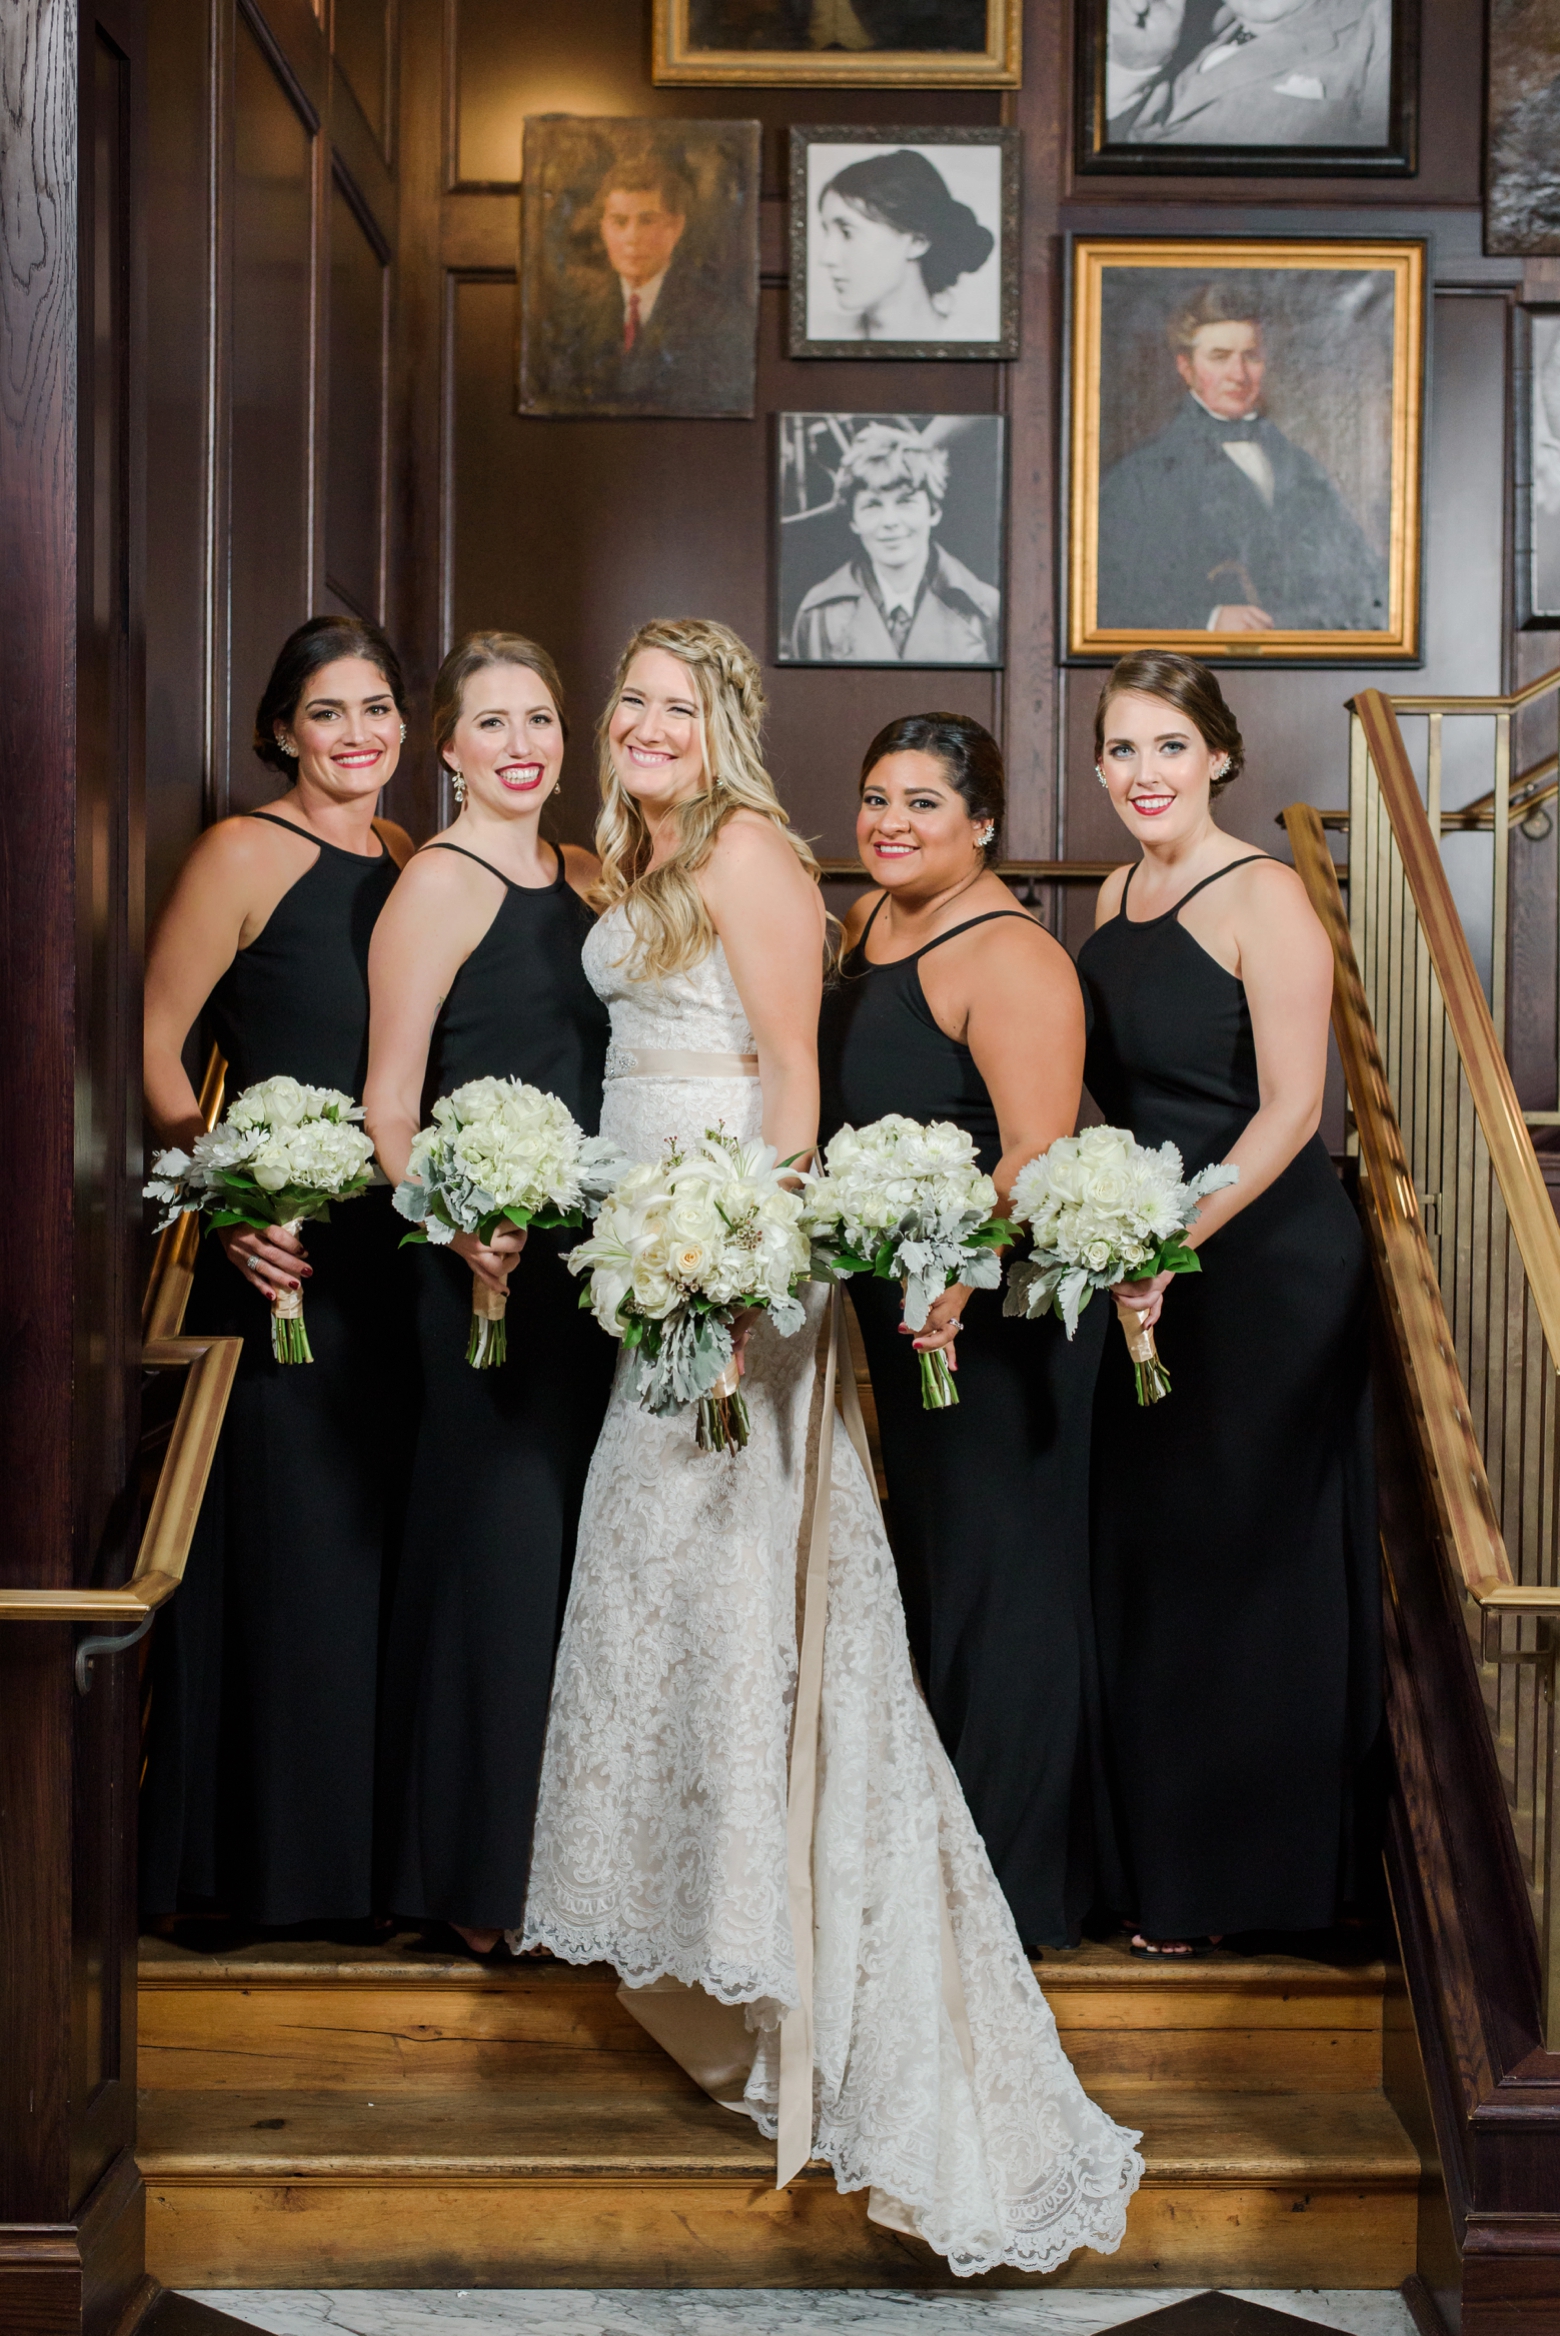 Bride and her Bridesmaids psoe for a formal photo on the steps before her Oxford Exchange wedding